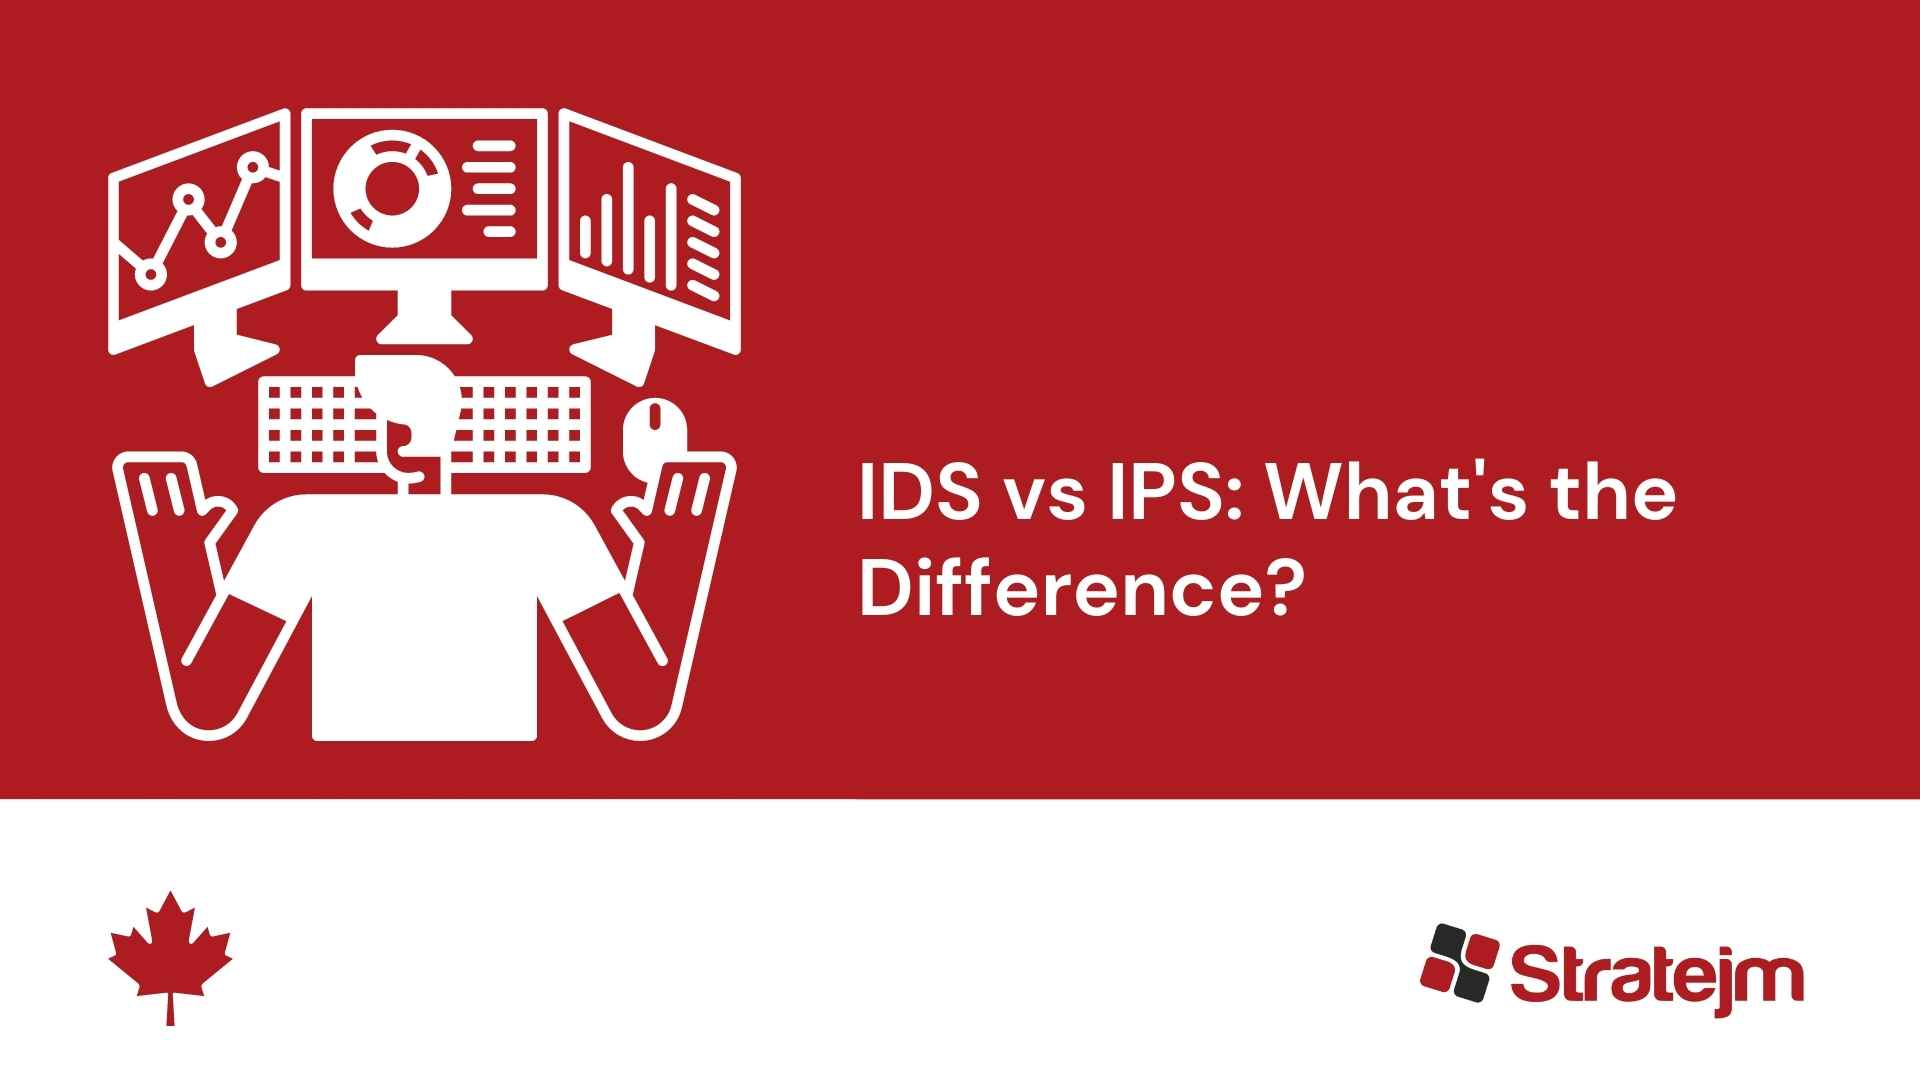 IDS vs IPS: What's the Difference?